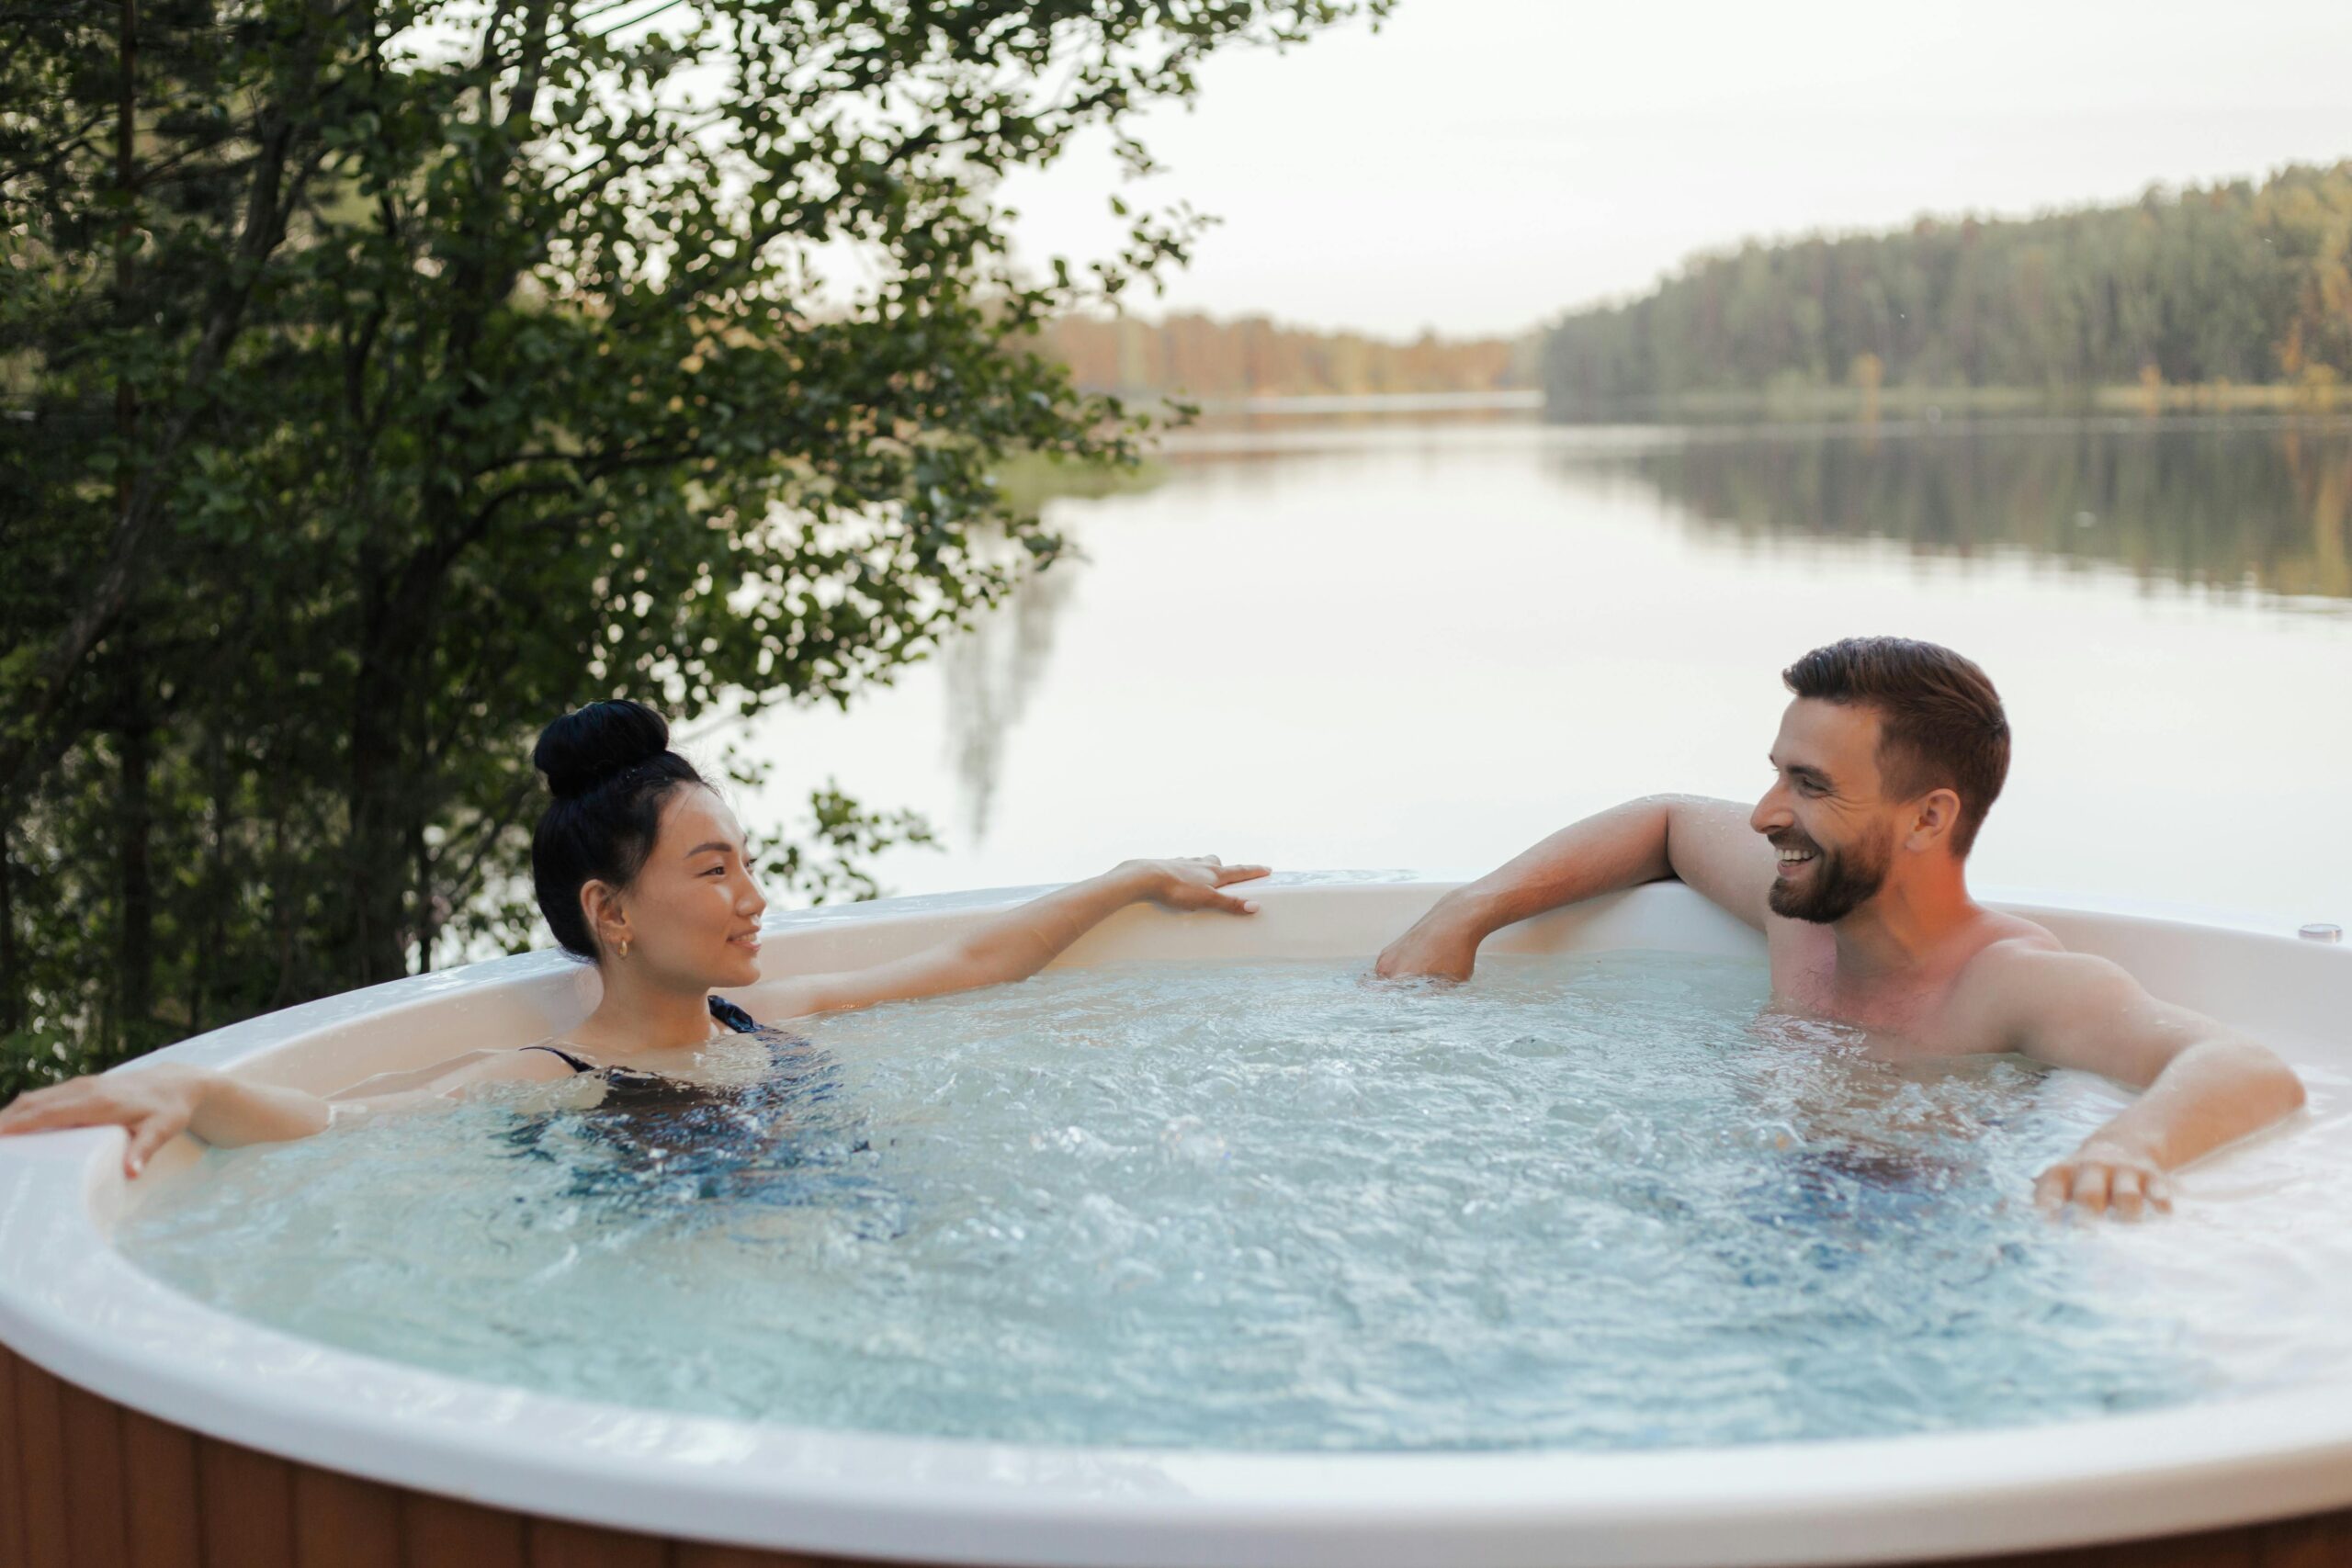 Making A Romantic Evening With Your Hot Tub Scaled